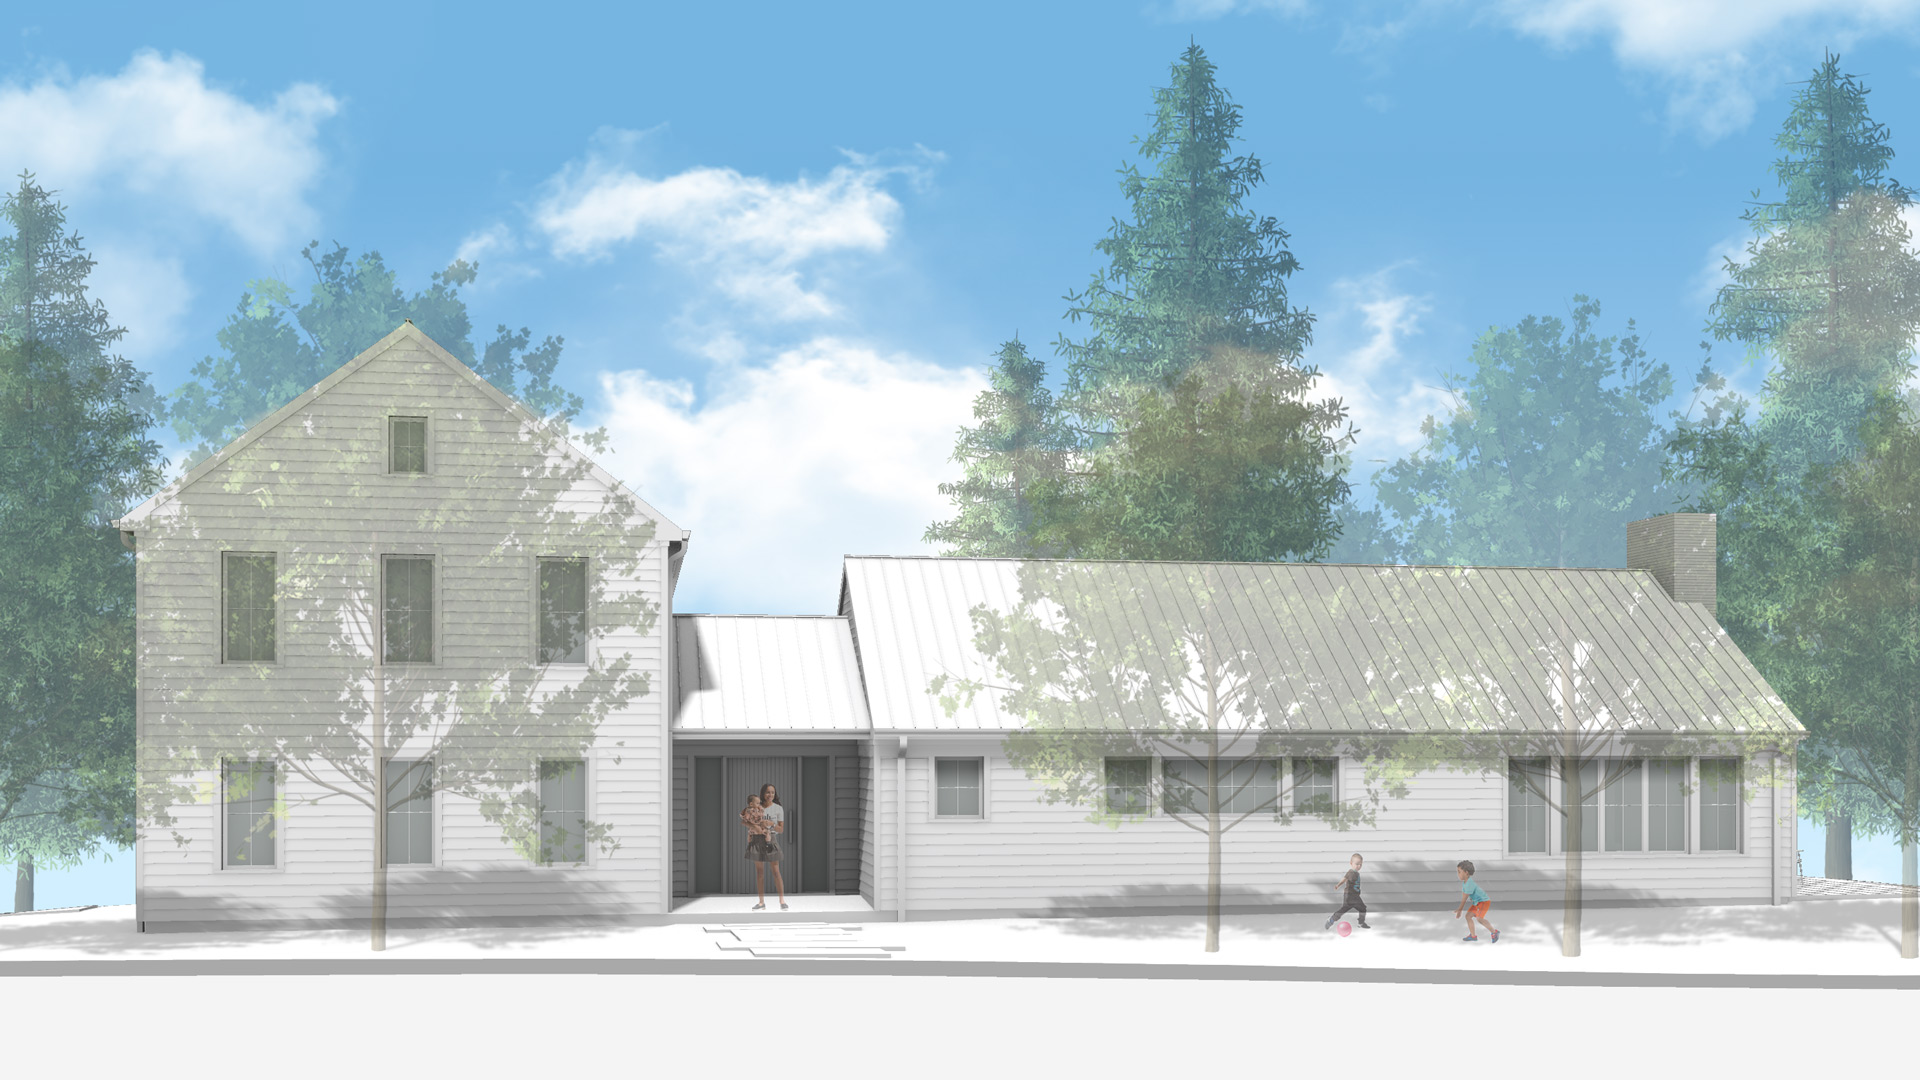 The front elevation of the new modern farmhouse is composed of two larger volumes connected by a smaller entry volume.